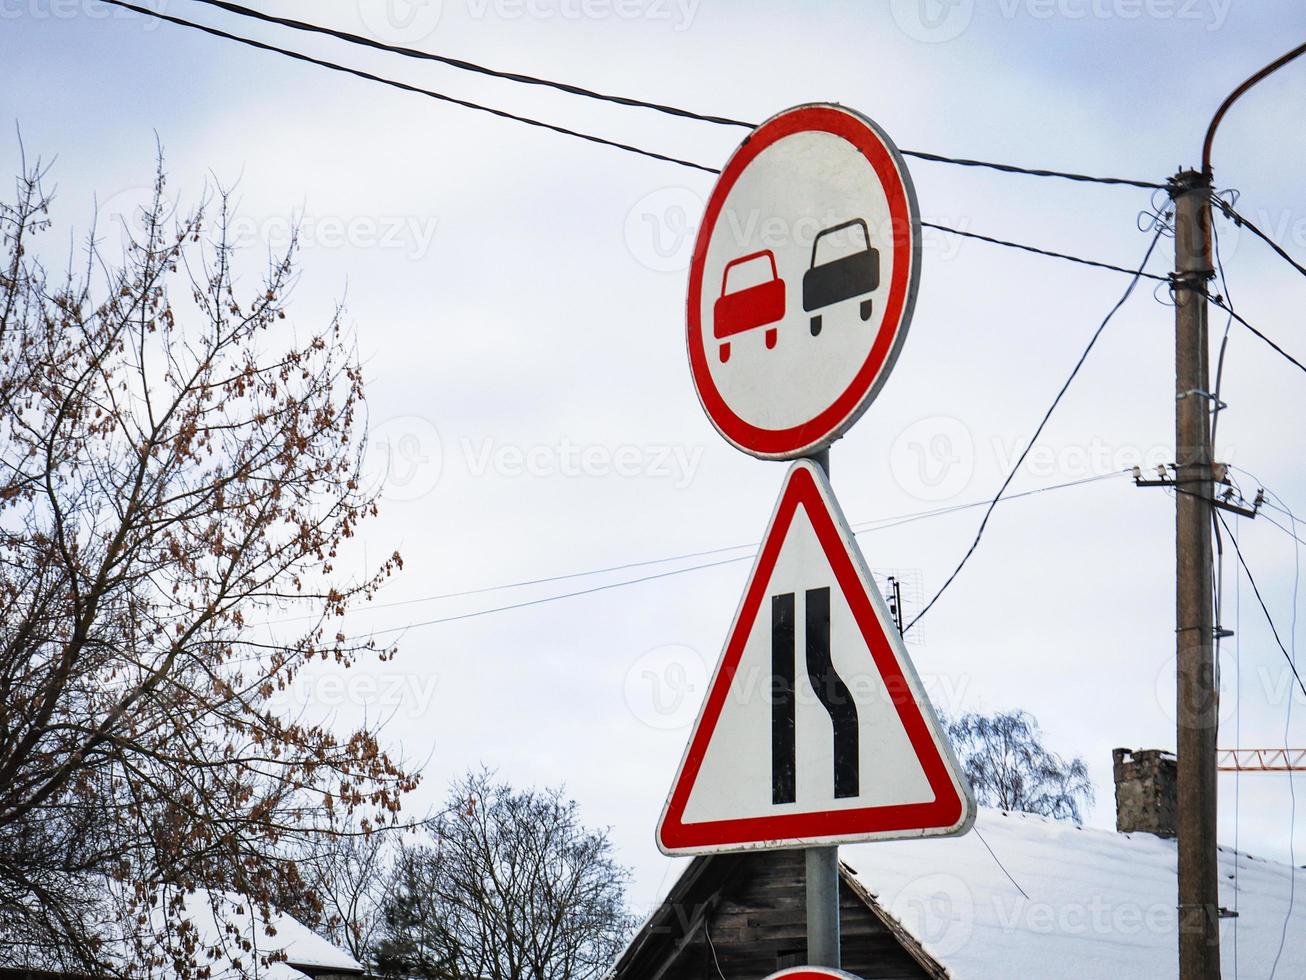 Road signs no overtaking round signa and triangle on sky background with leafless trees and snowy rooftop photo